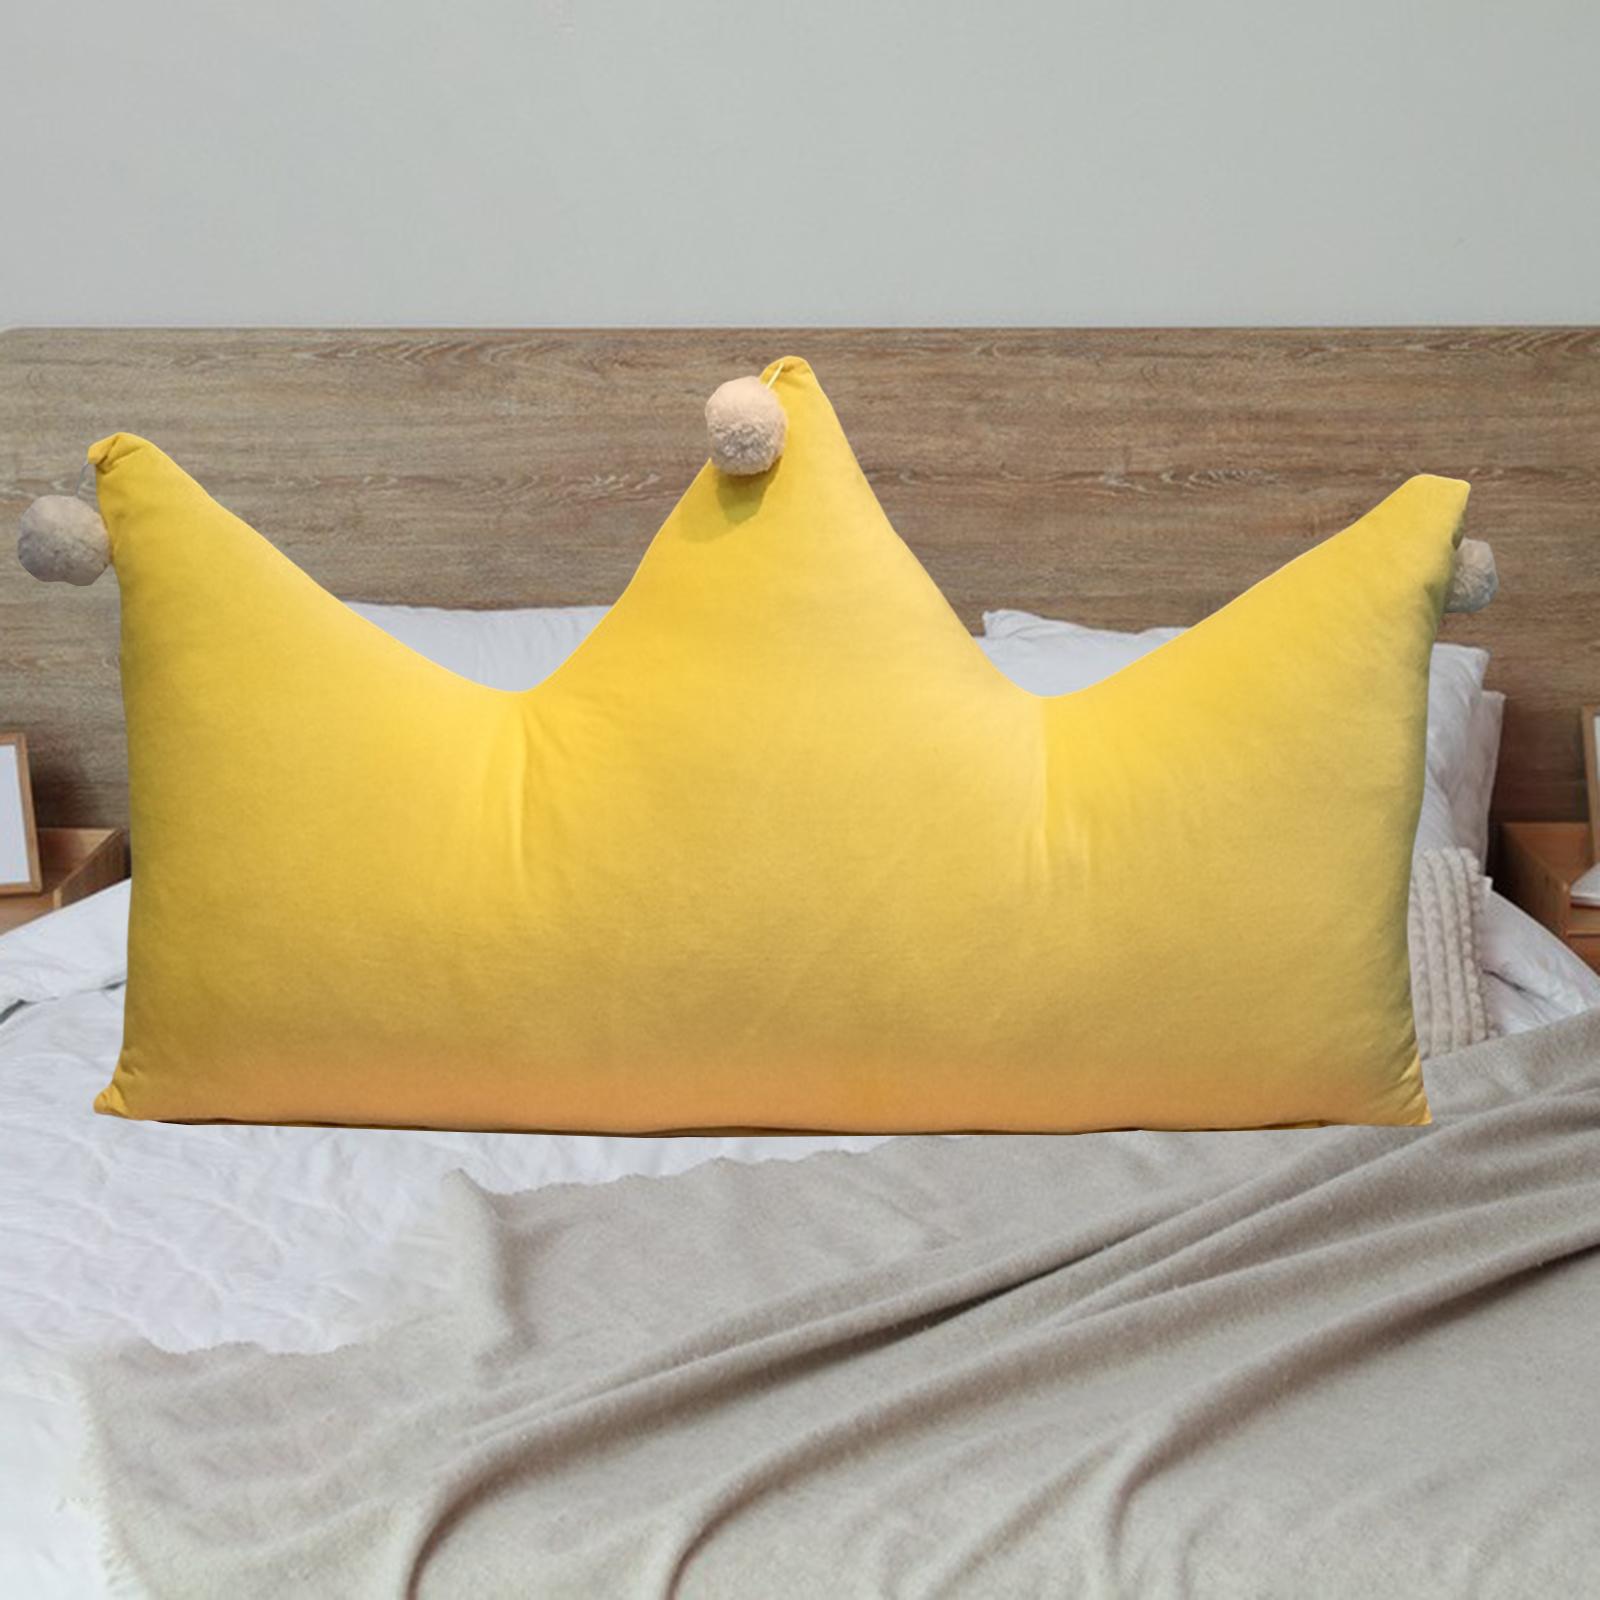 Crown Beds Throw Pillows Office PP Cotton Filled for Bedroom Rest Kids Room Light Yellow